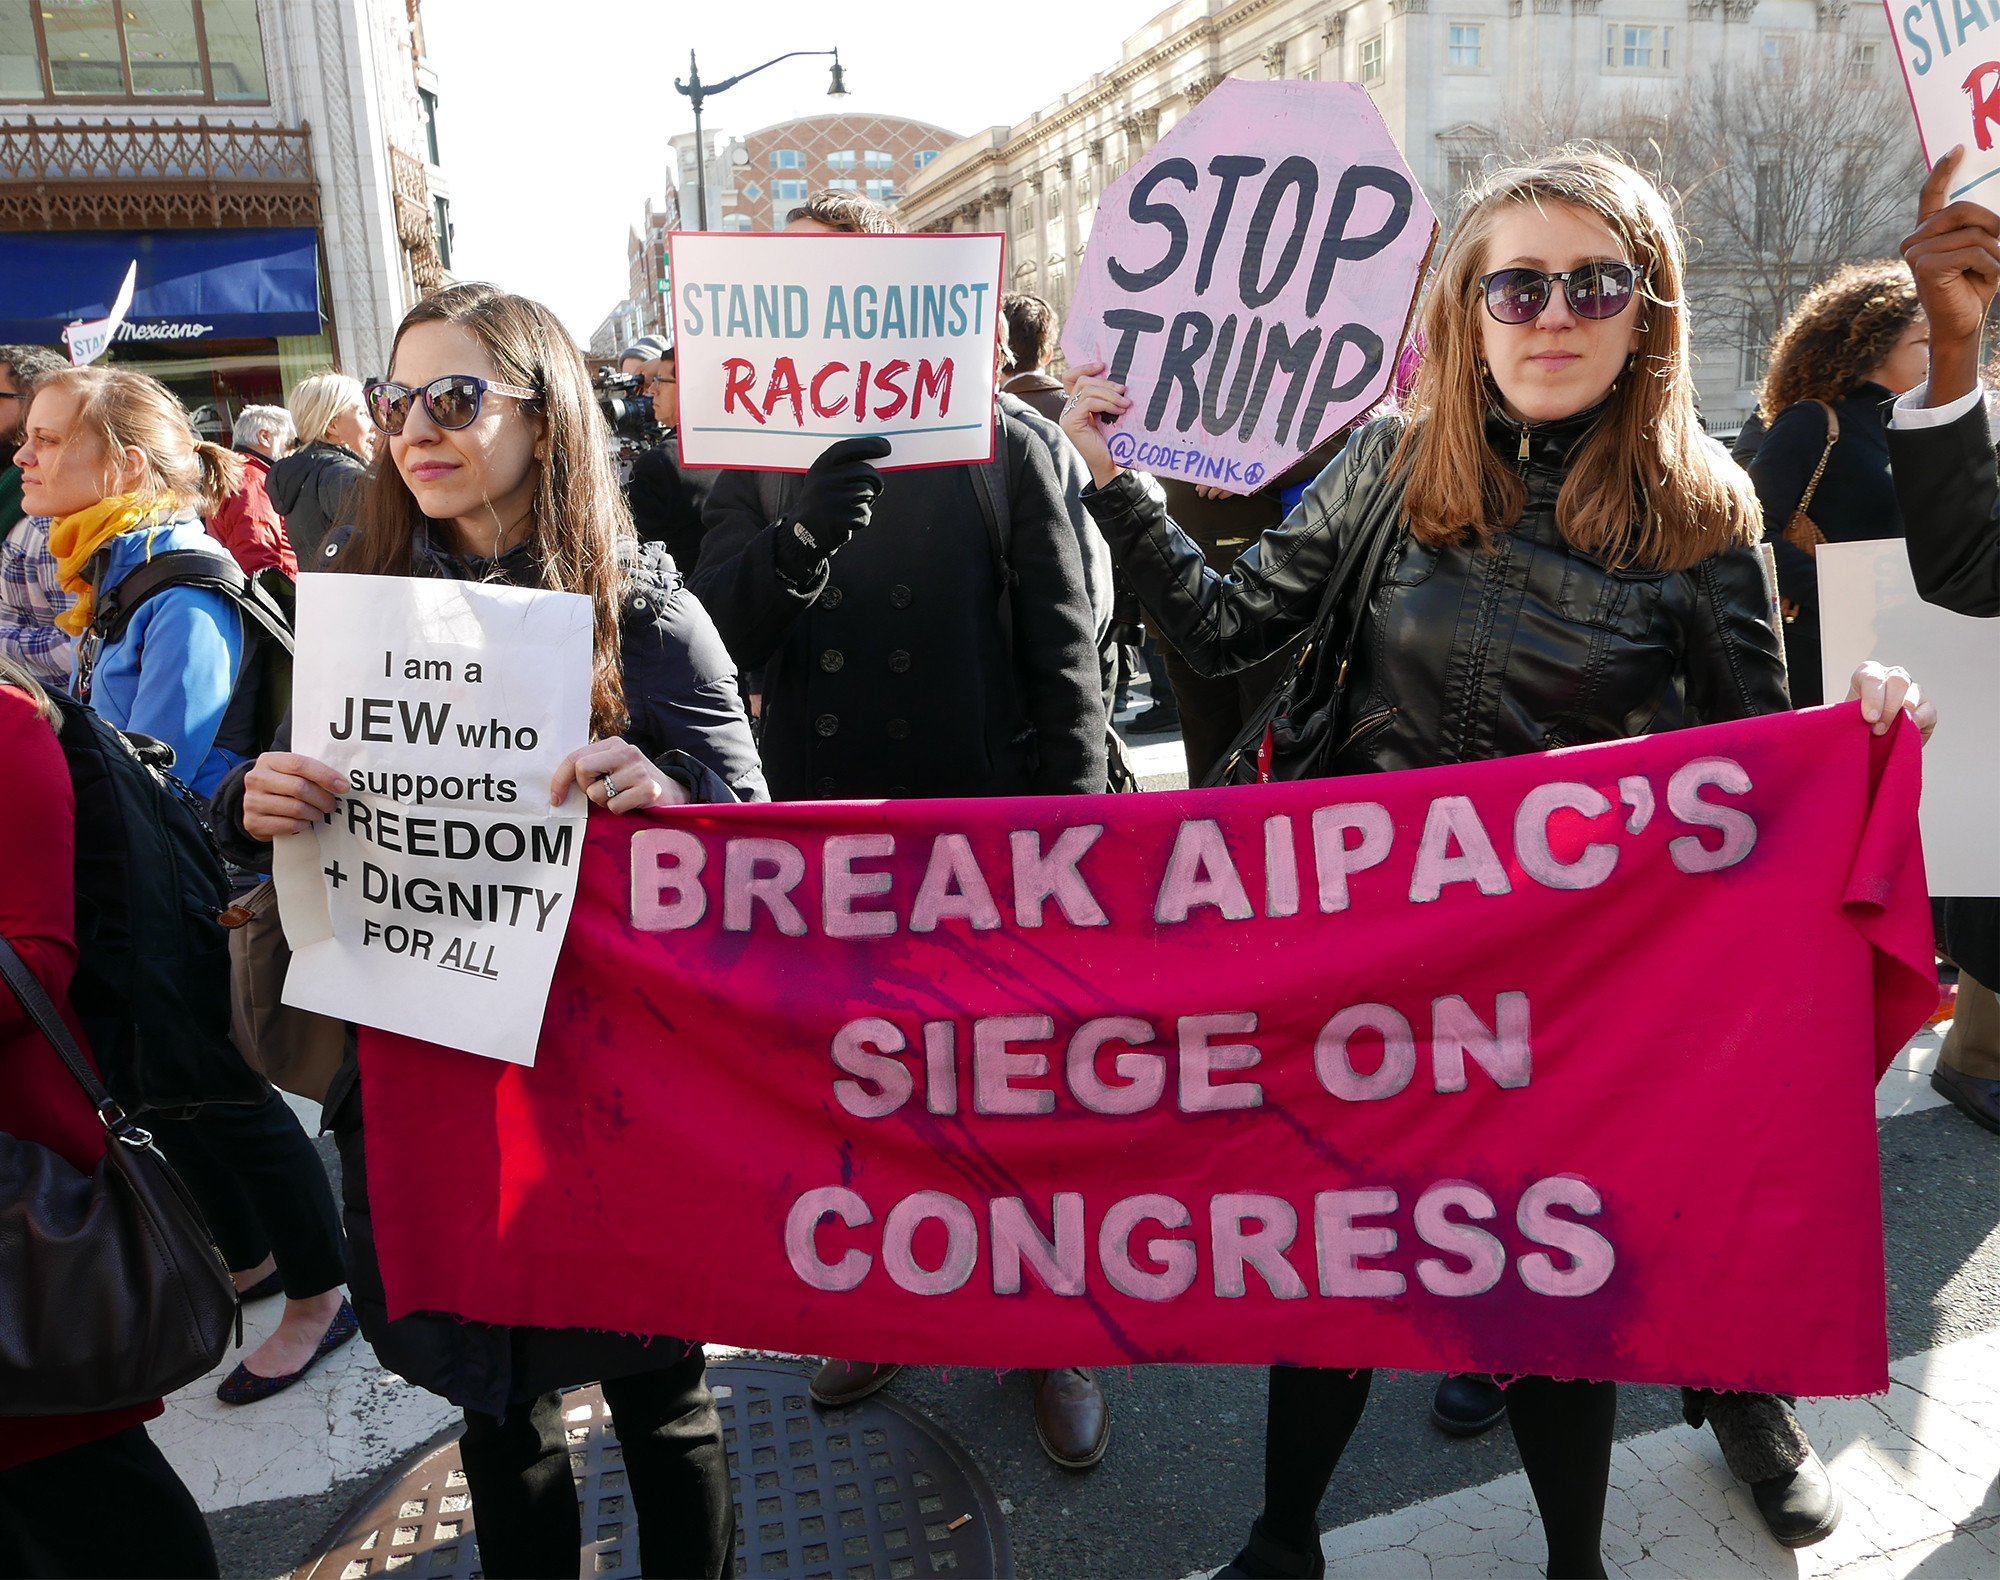 Protesters outside the Verizon Center where Donald Trump addressed AIPAC, Washington DC, March 21, 2016. (Susan Melkisethian/CC BY-NC-ND 2.0)